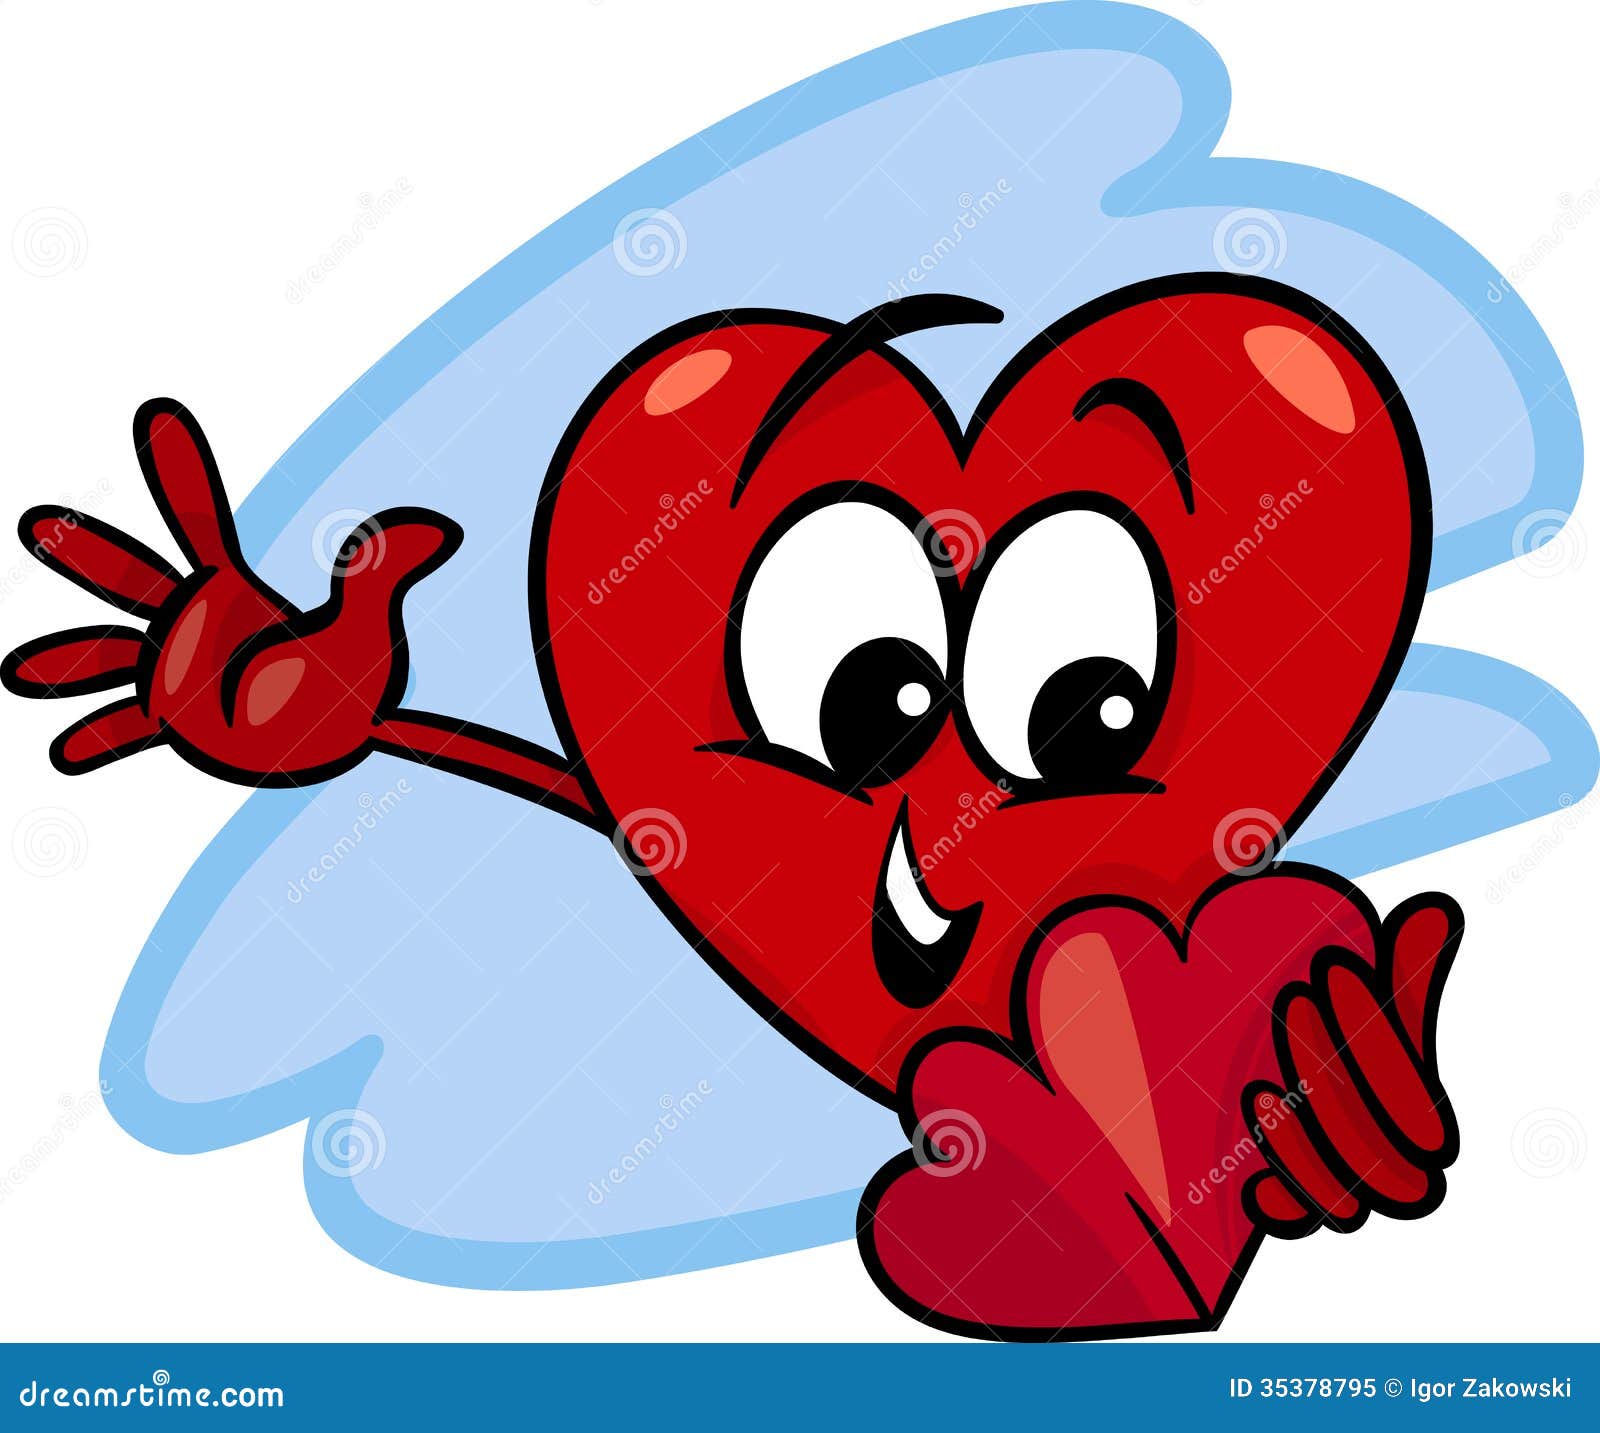 Heart with Valentine Card Cartoon Stock Vector - Illustration of cheerful,  greeting: 35378795